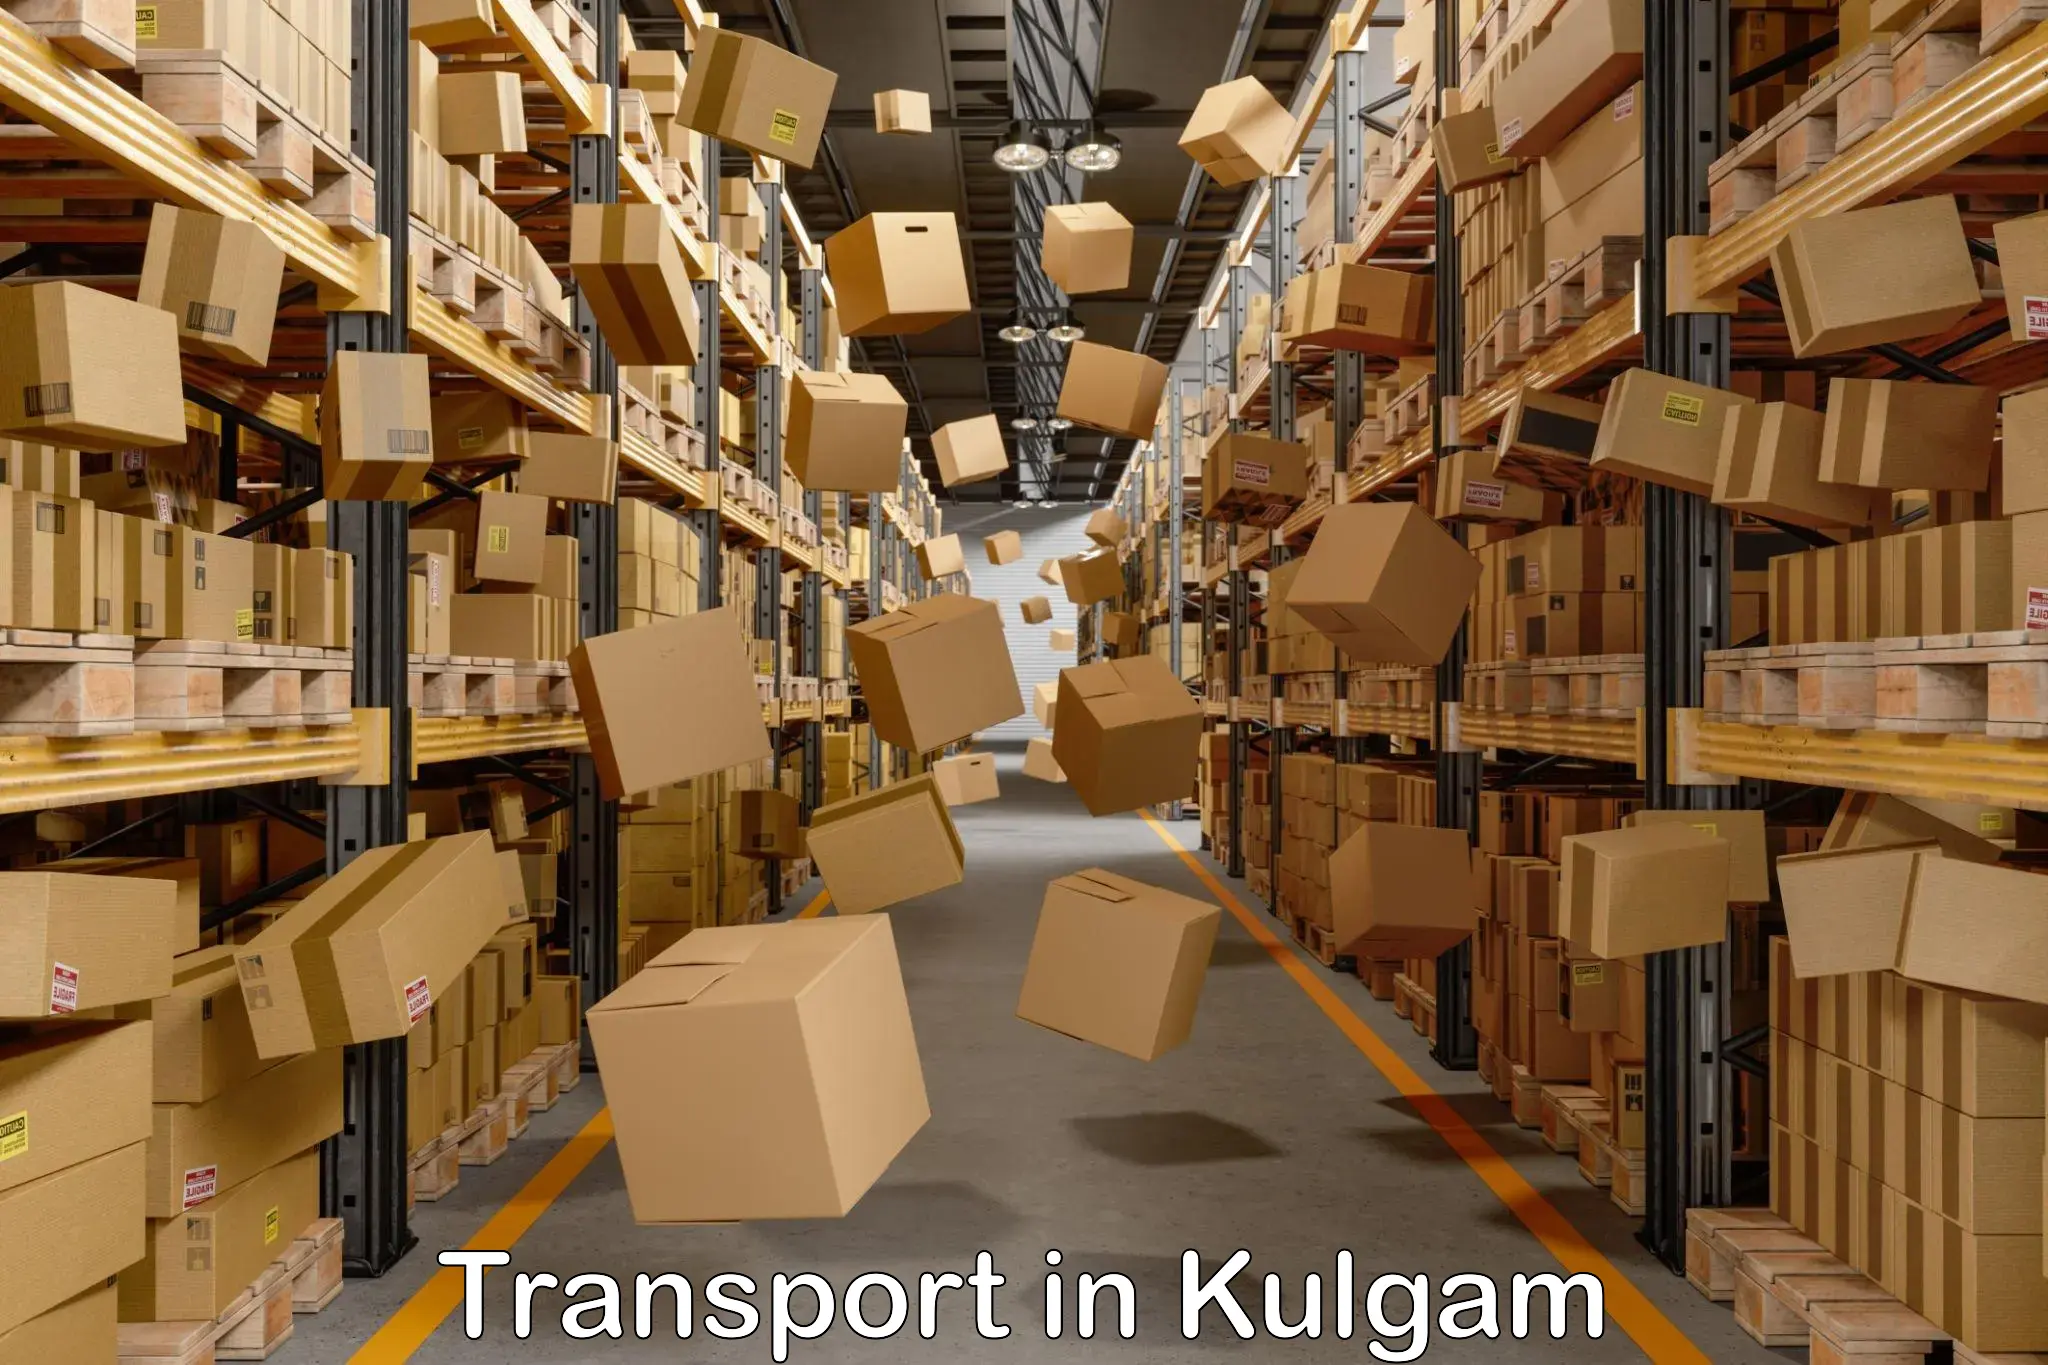 Container transport service in Kulgam